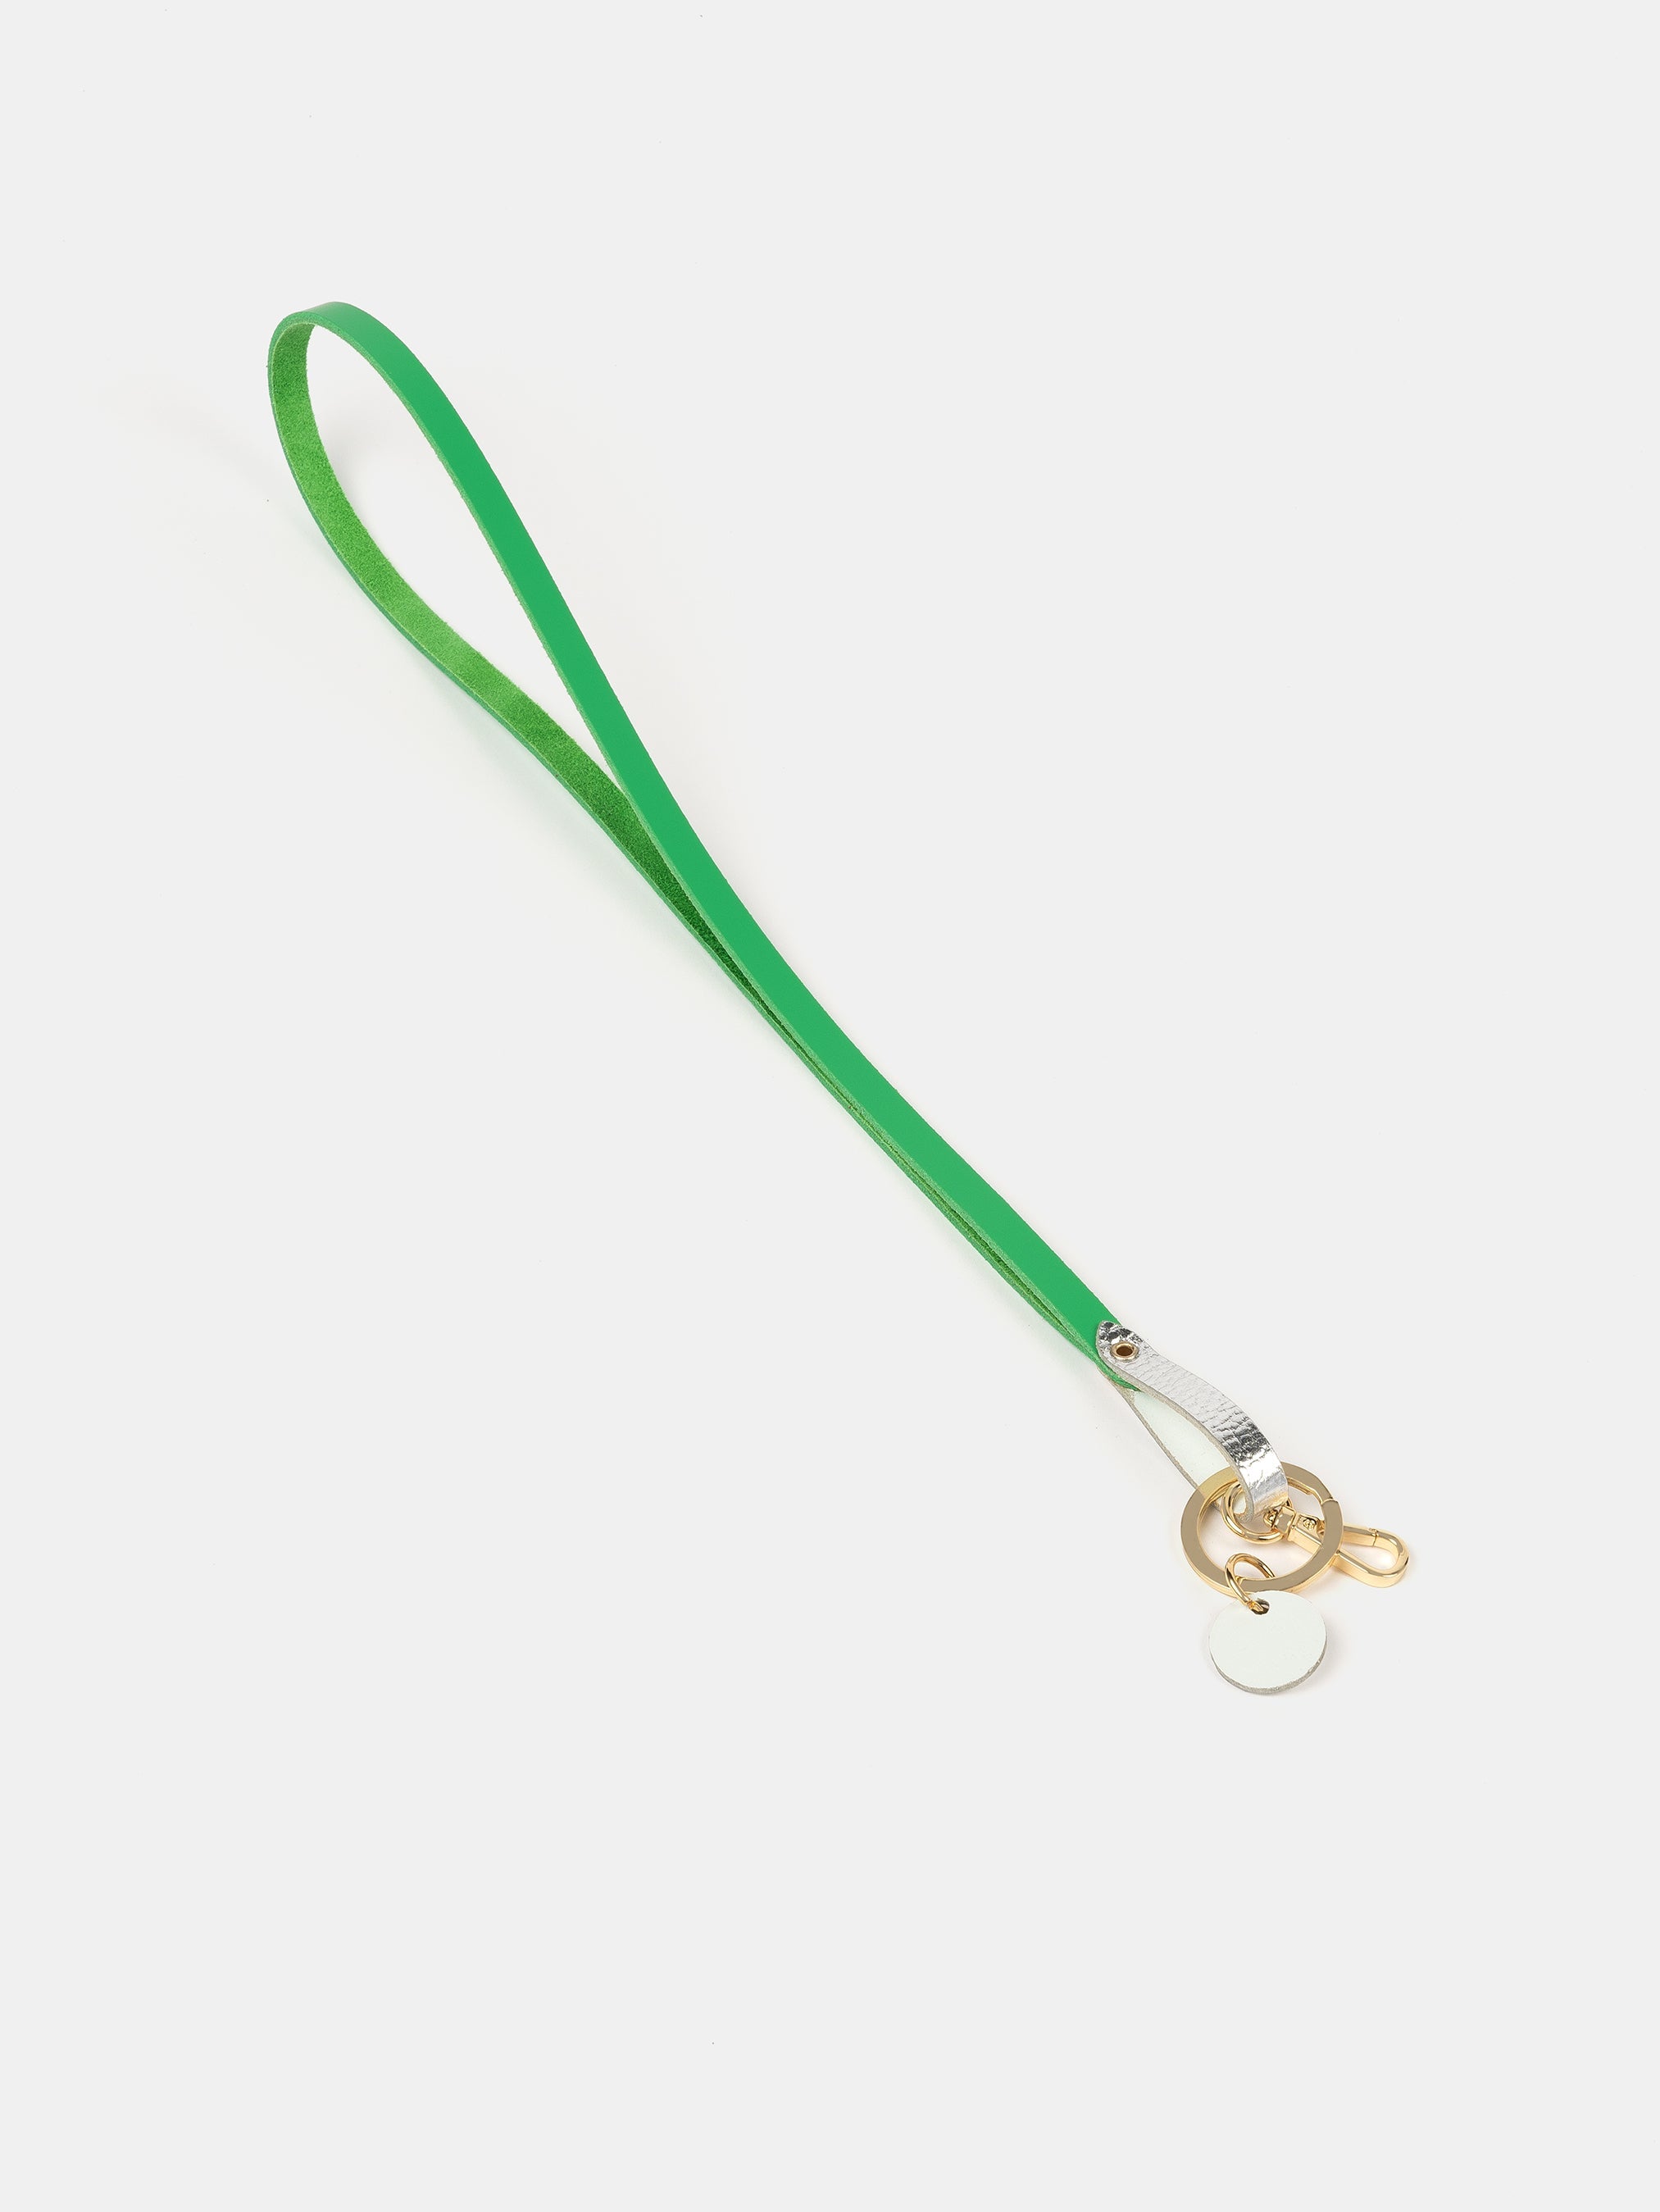 The Lanyard - Apple Green & Silver Foil